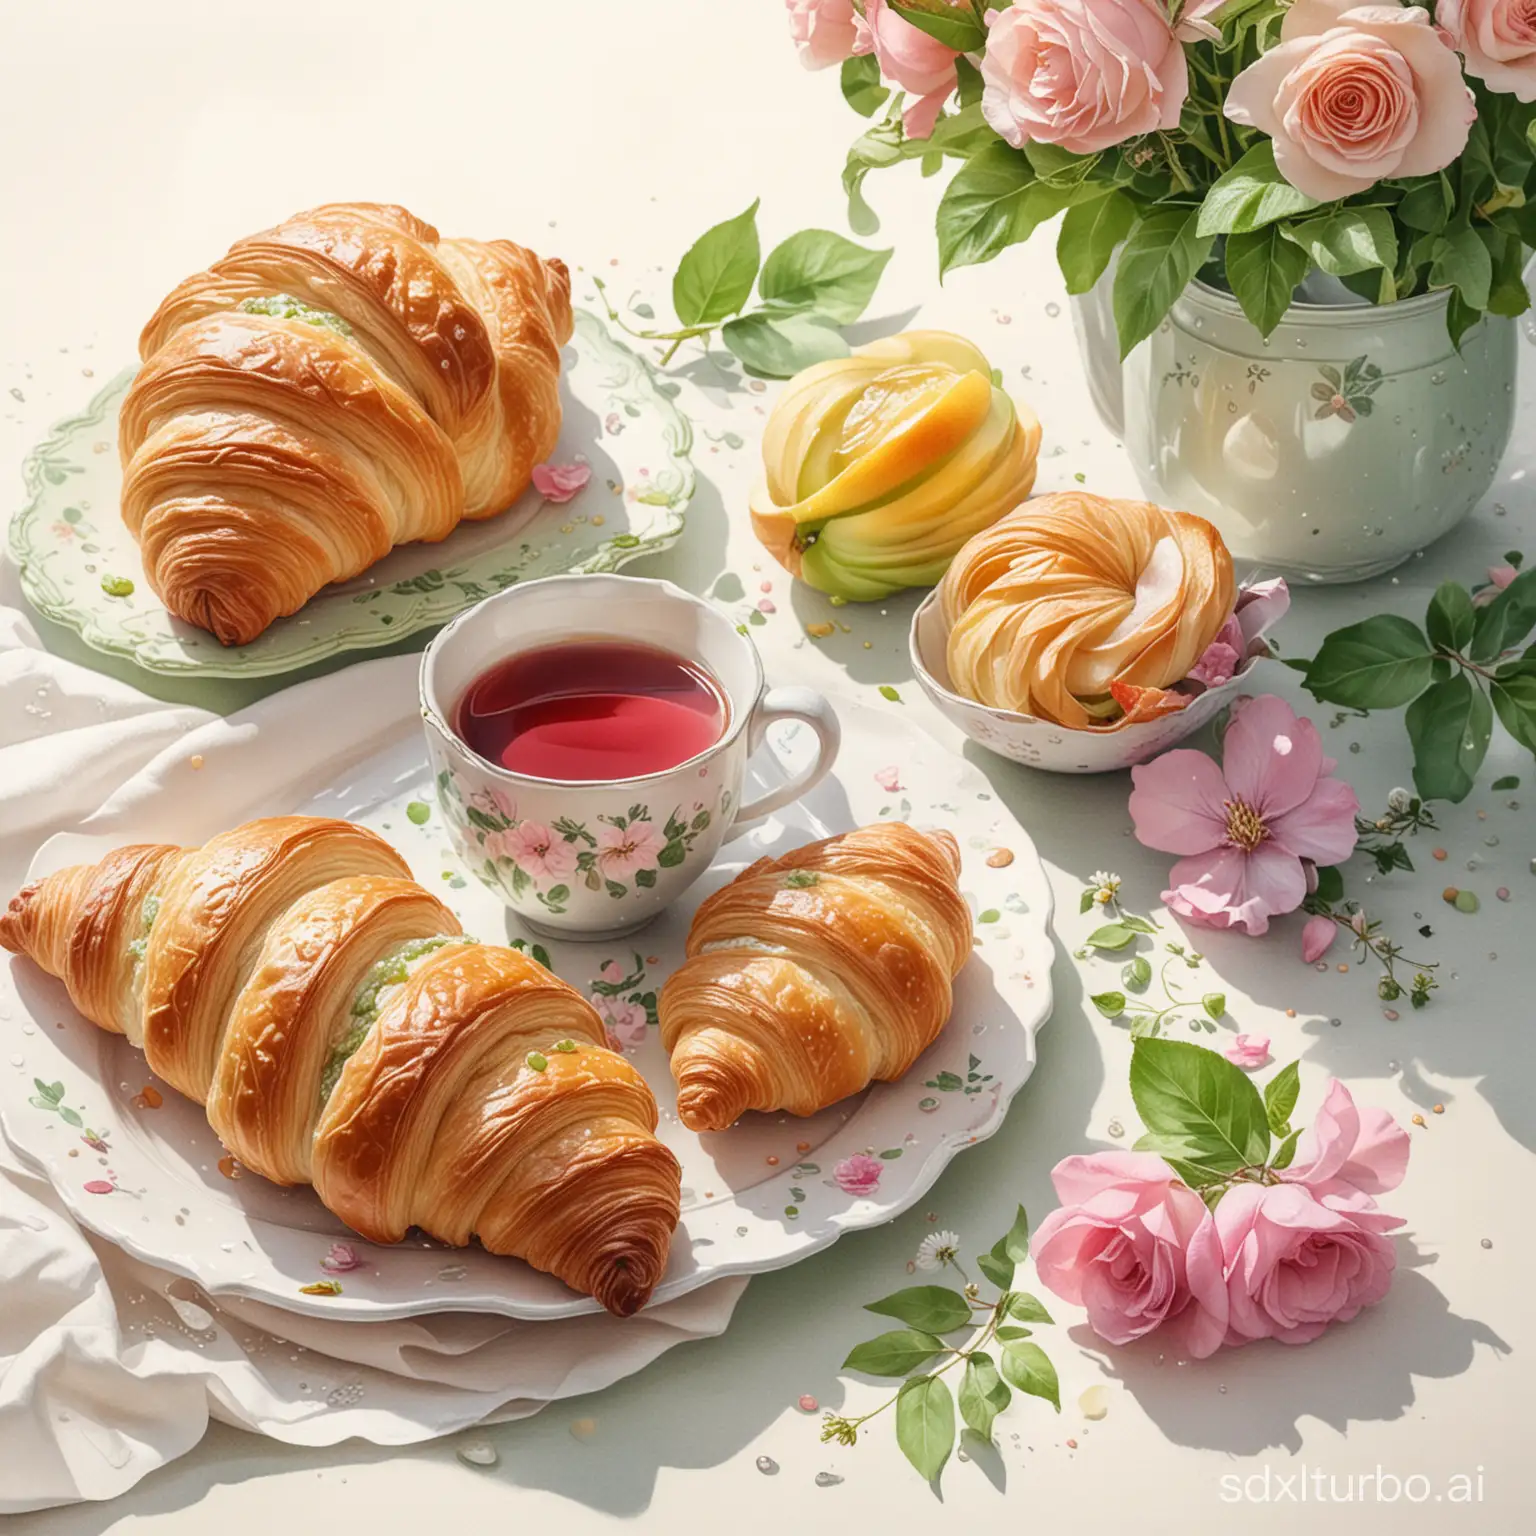 Delicate-Vintage-Apple-Croissant-Pastry-and-Tea-with-Floral-Accents